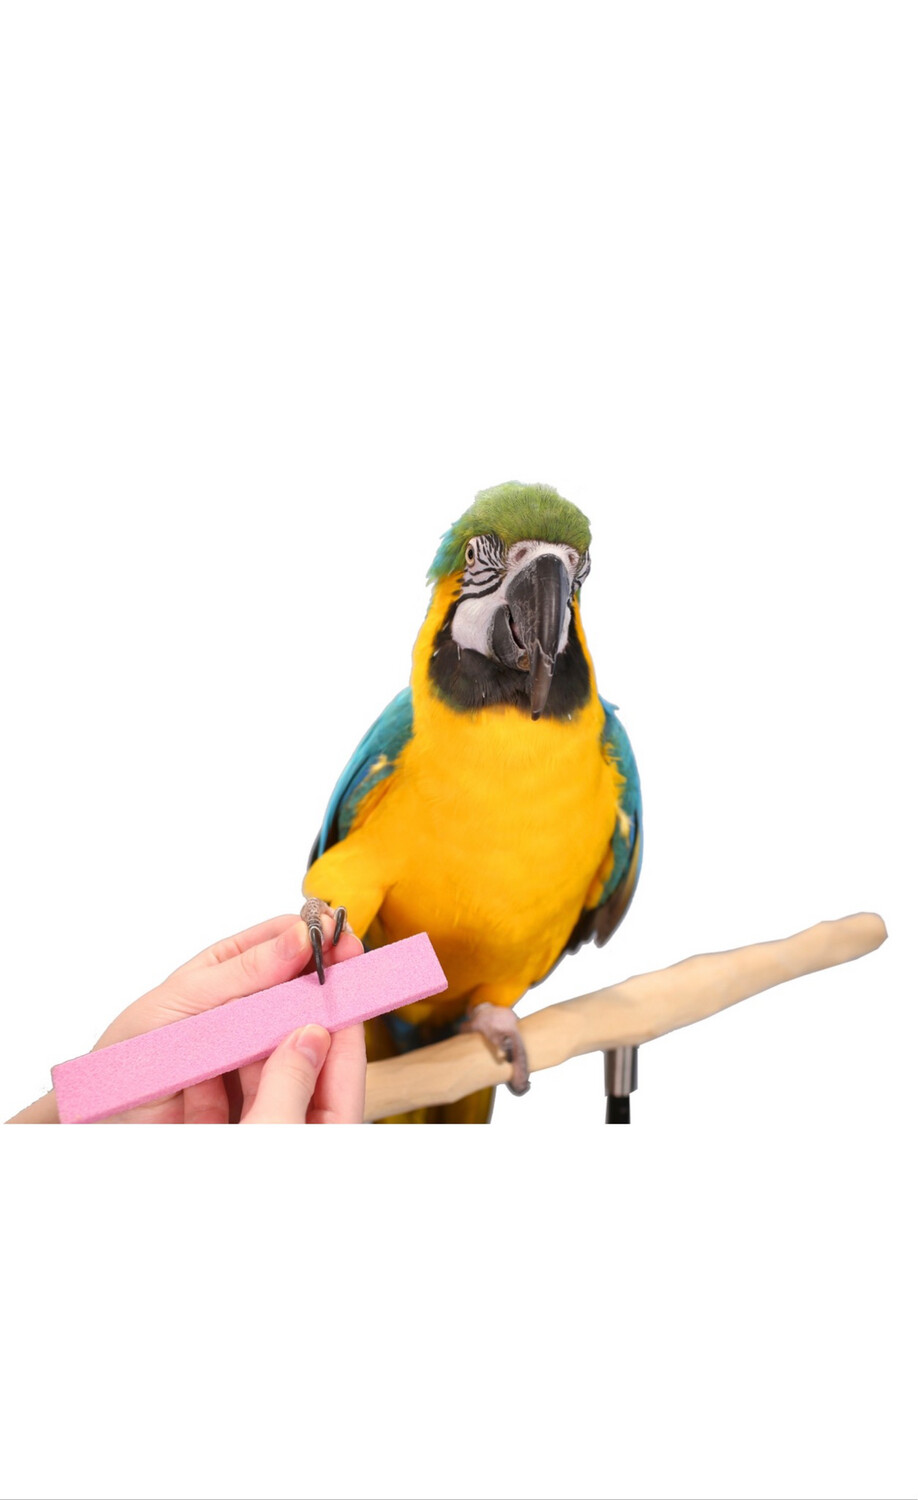 Bird Nail Clipping Essentials: Keeping Your Feathered Friend's Feet Happy